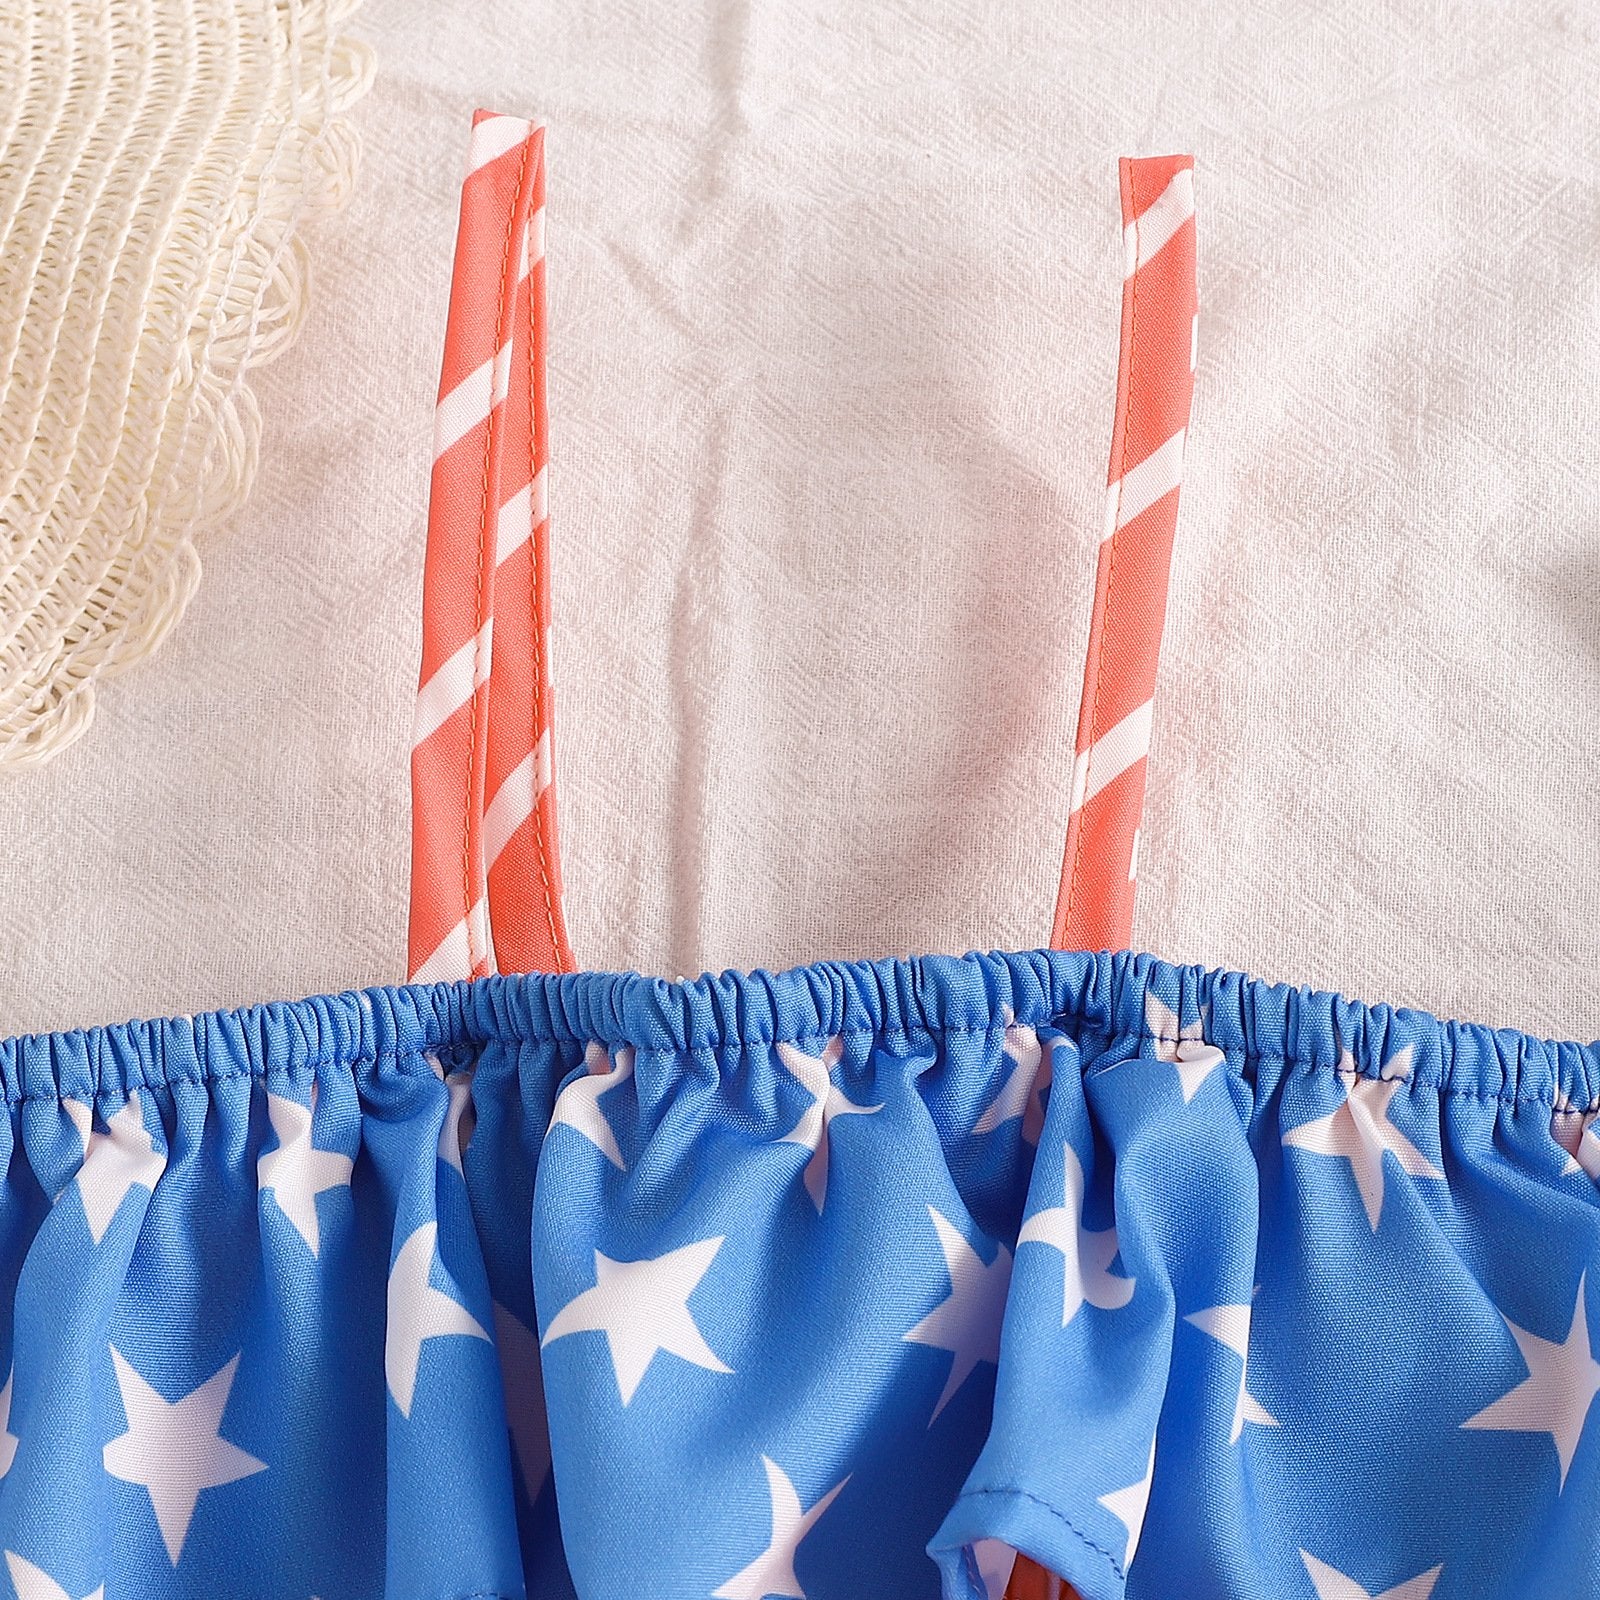 Infant 4th of July Outfit Baby Girl July 4 Dress Up Suit My First Independence Day Short 2pcs Set